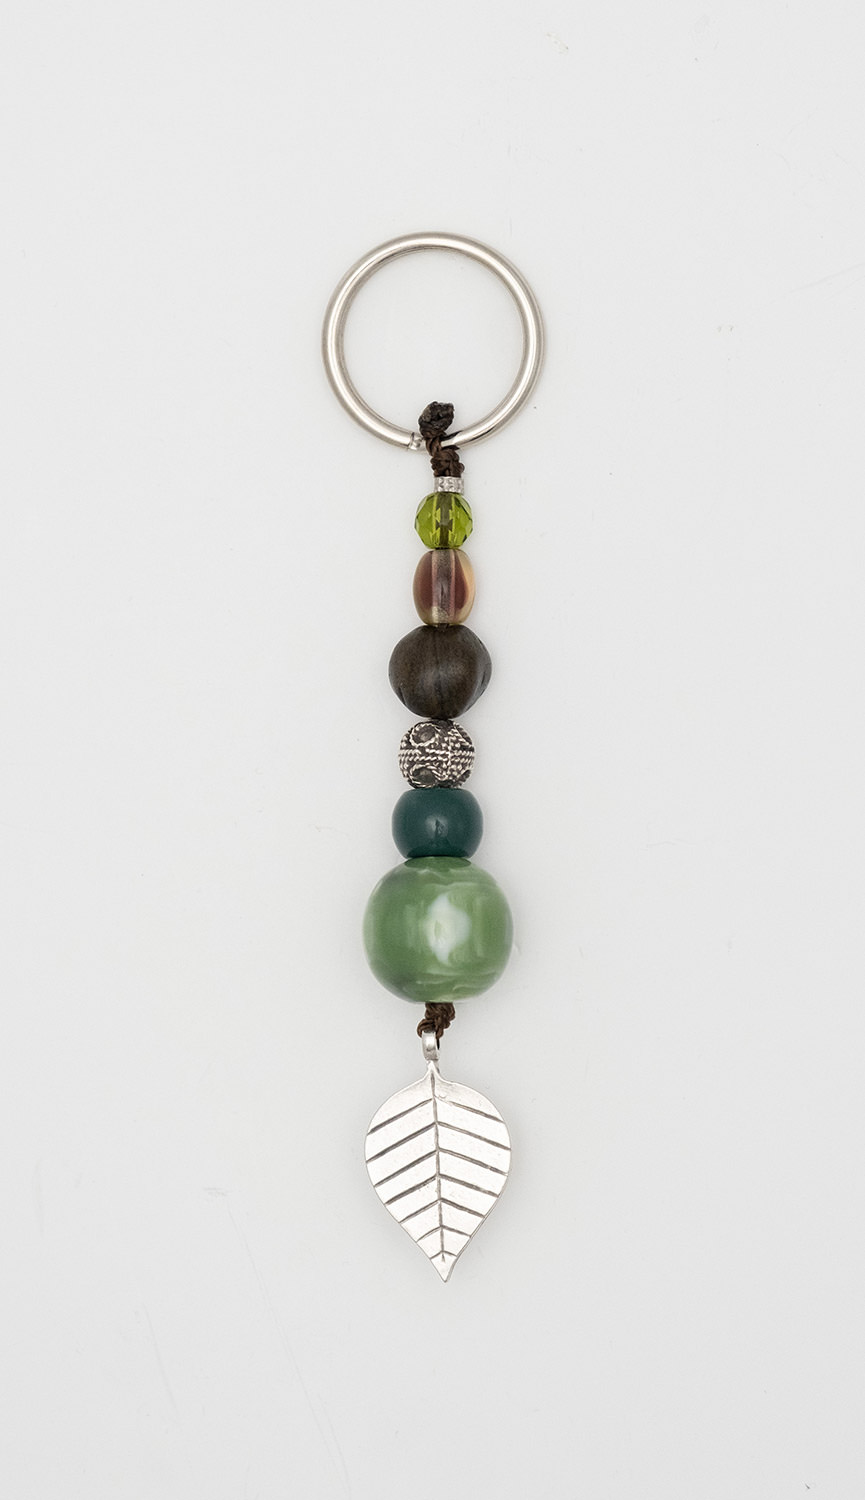 Keyring made of artificial resin, crystal and conifer seed with a leaf